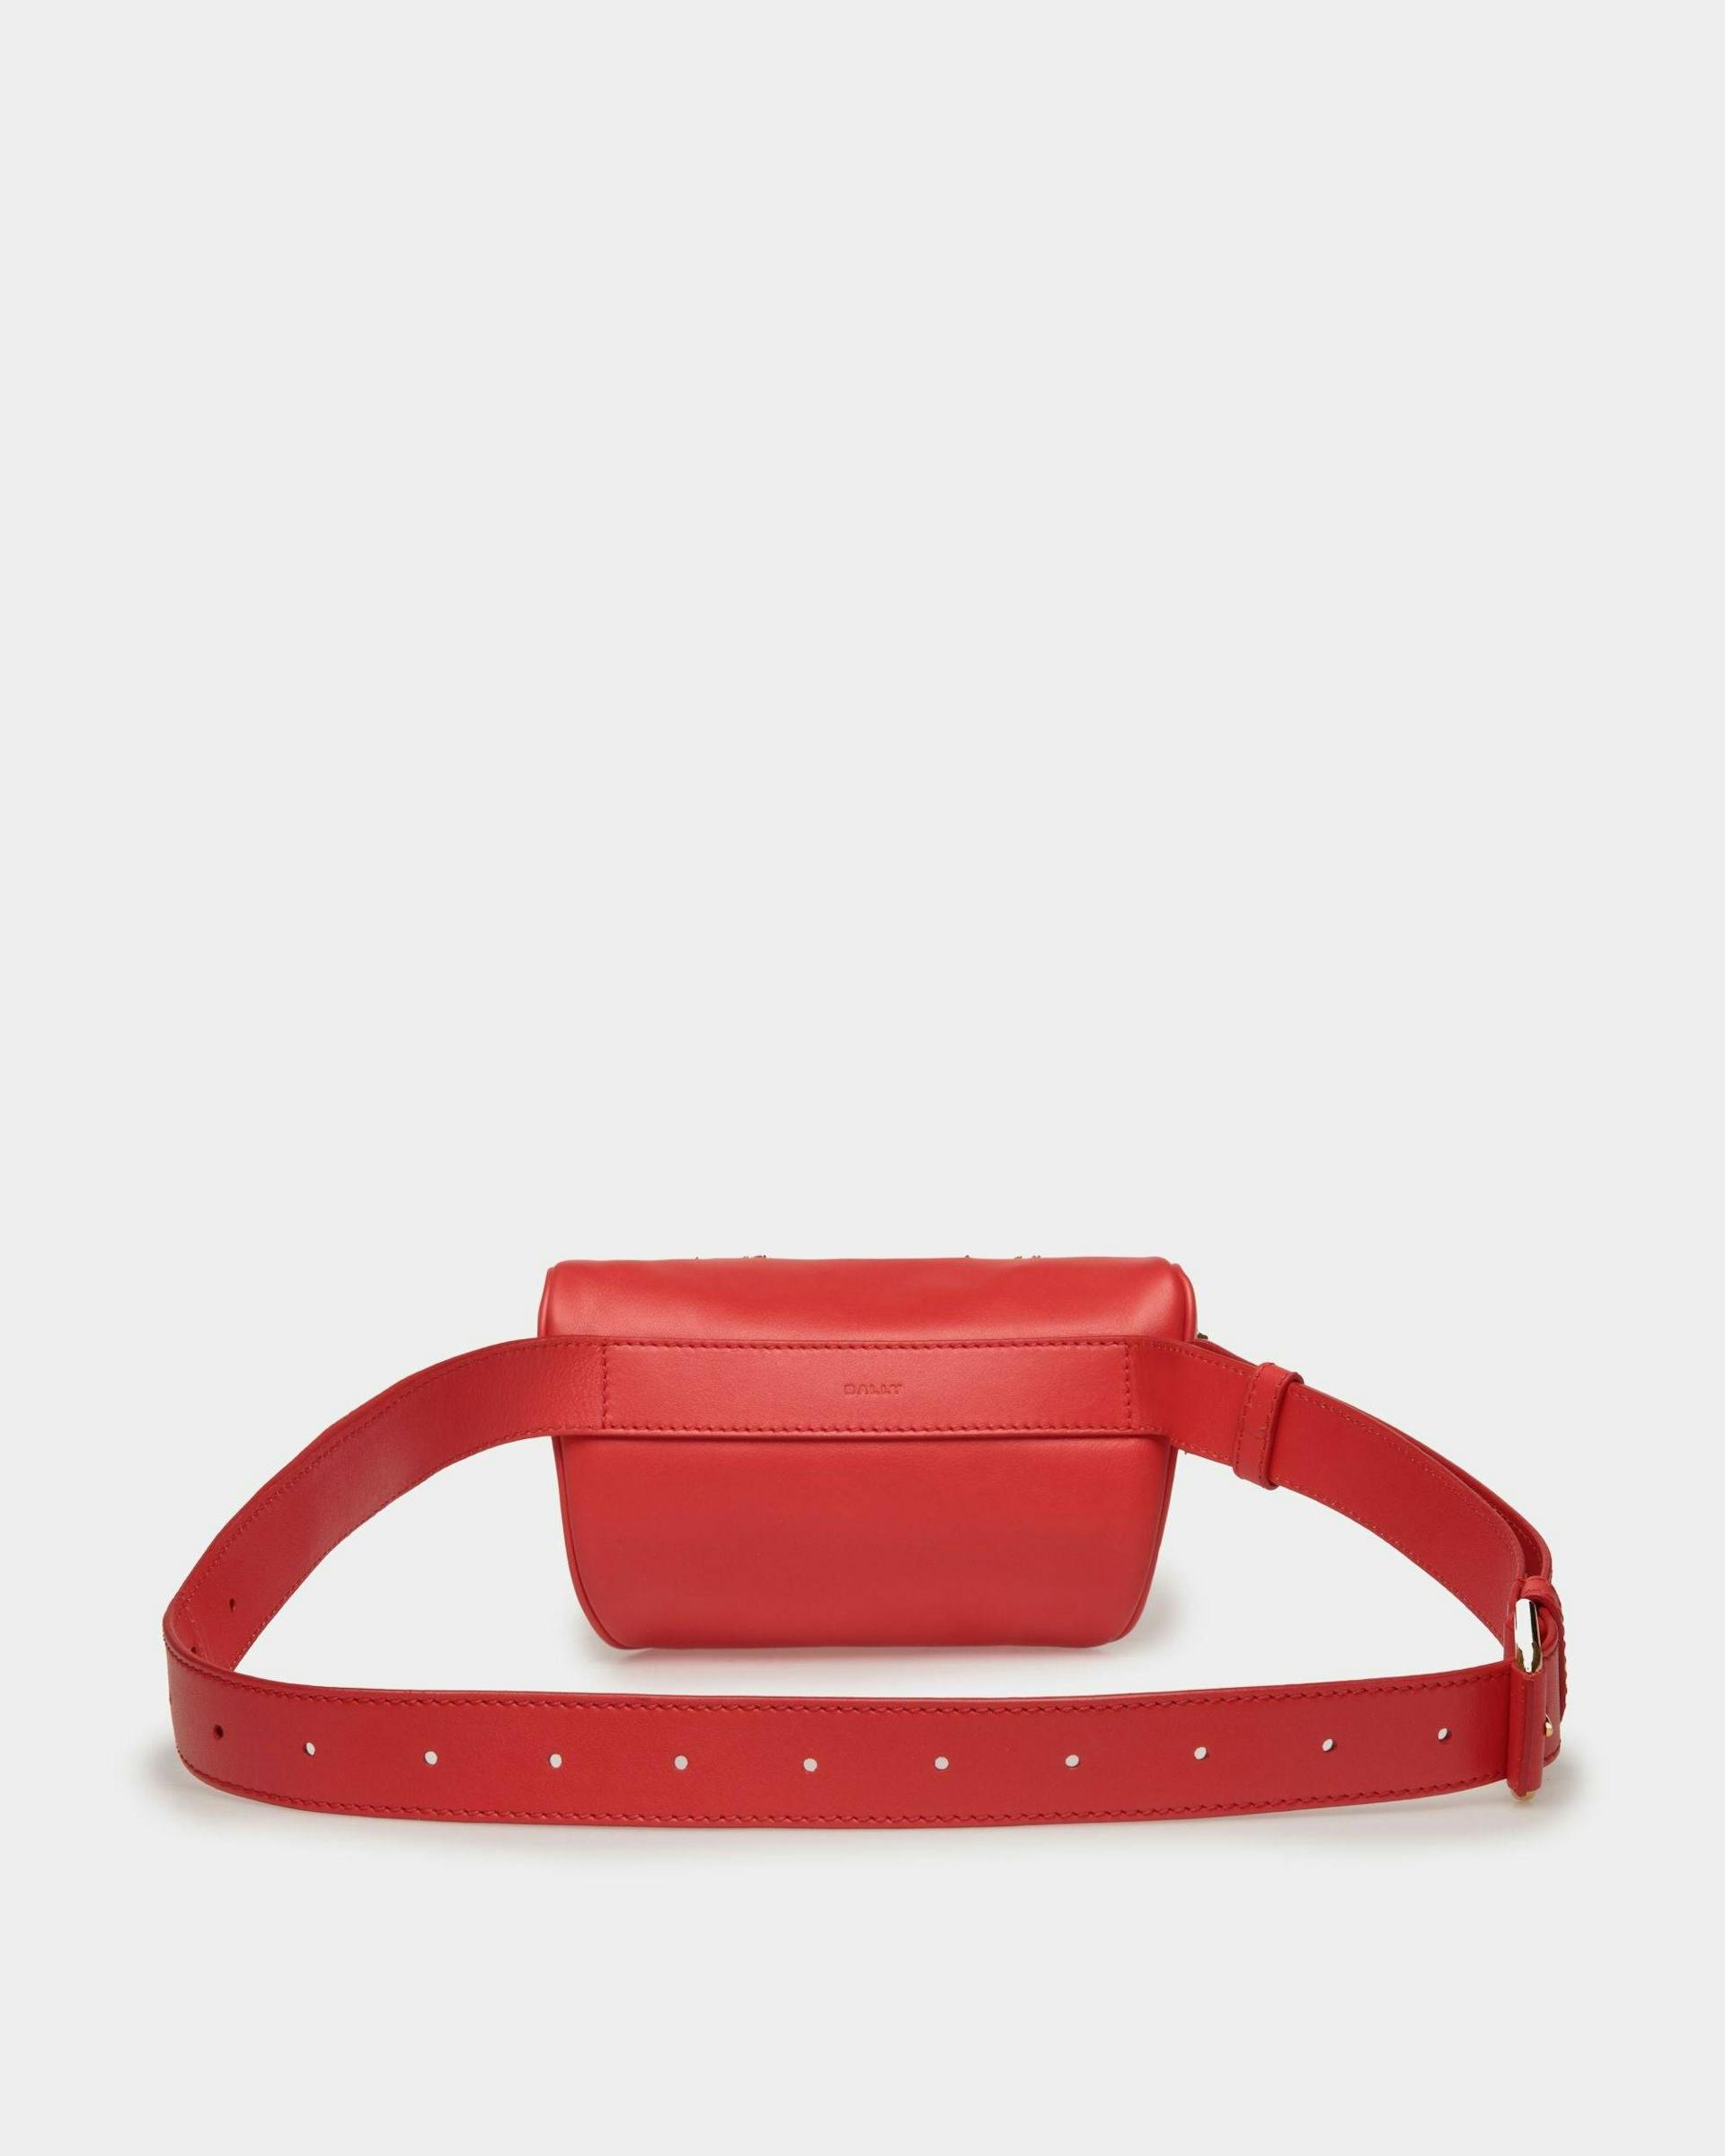 Women's Moutain Belt Bag  in Red Leather | Bally | Still Life Back